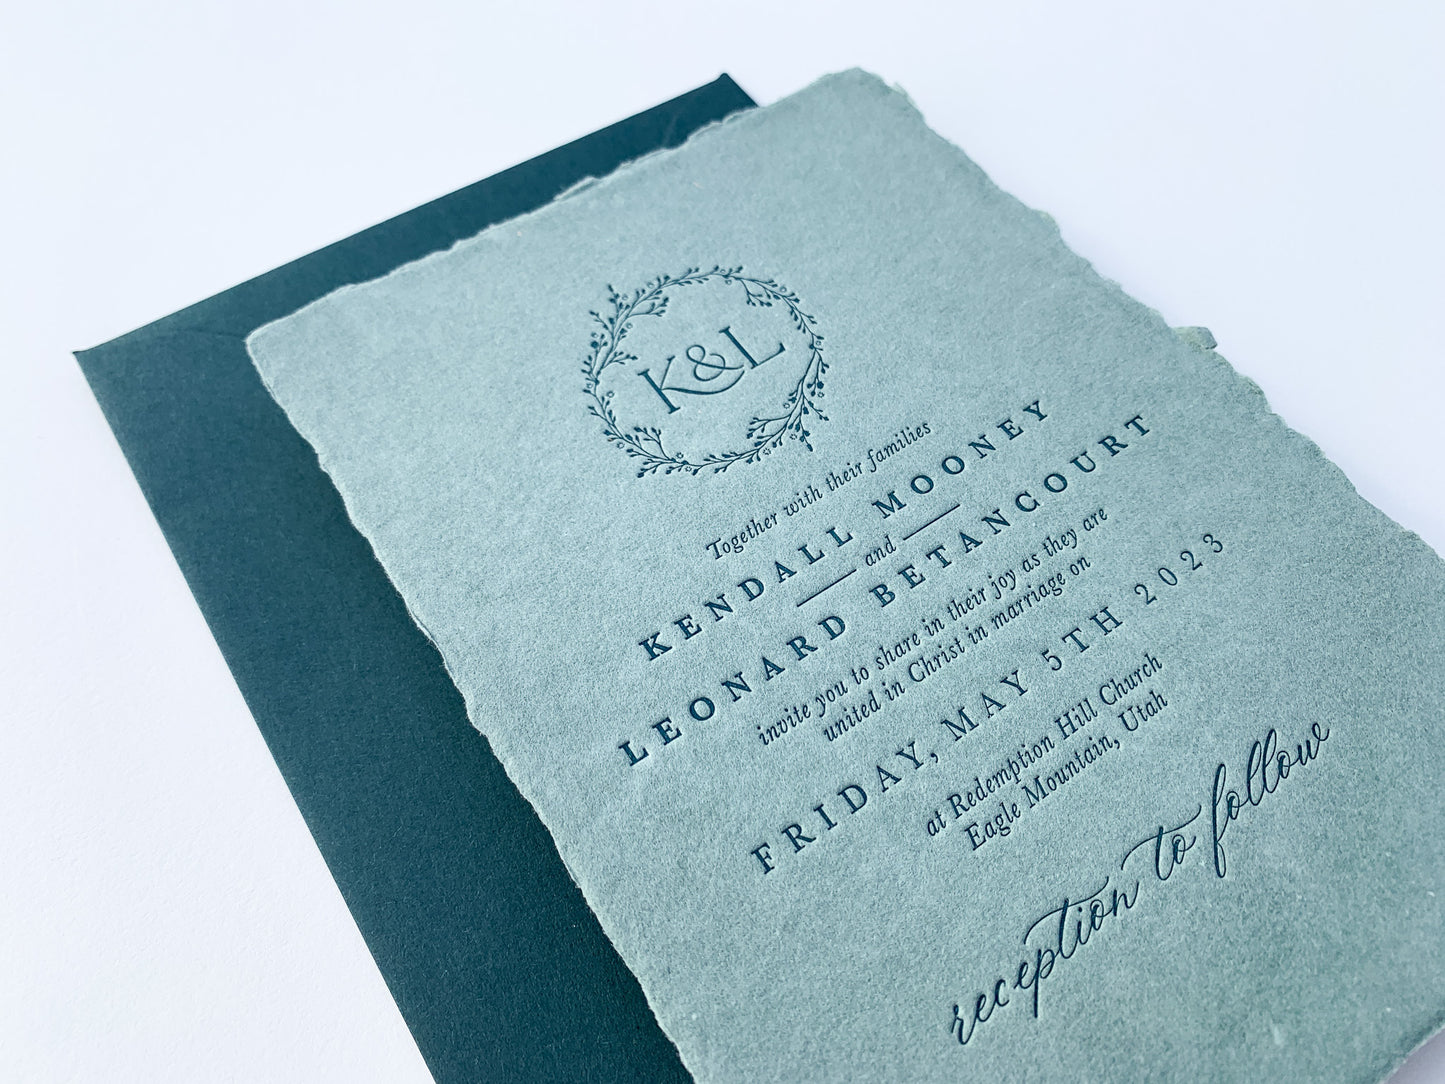 The Betancourt Suite Invitation Sample | The Wedding Collection